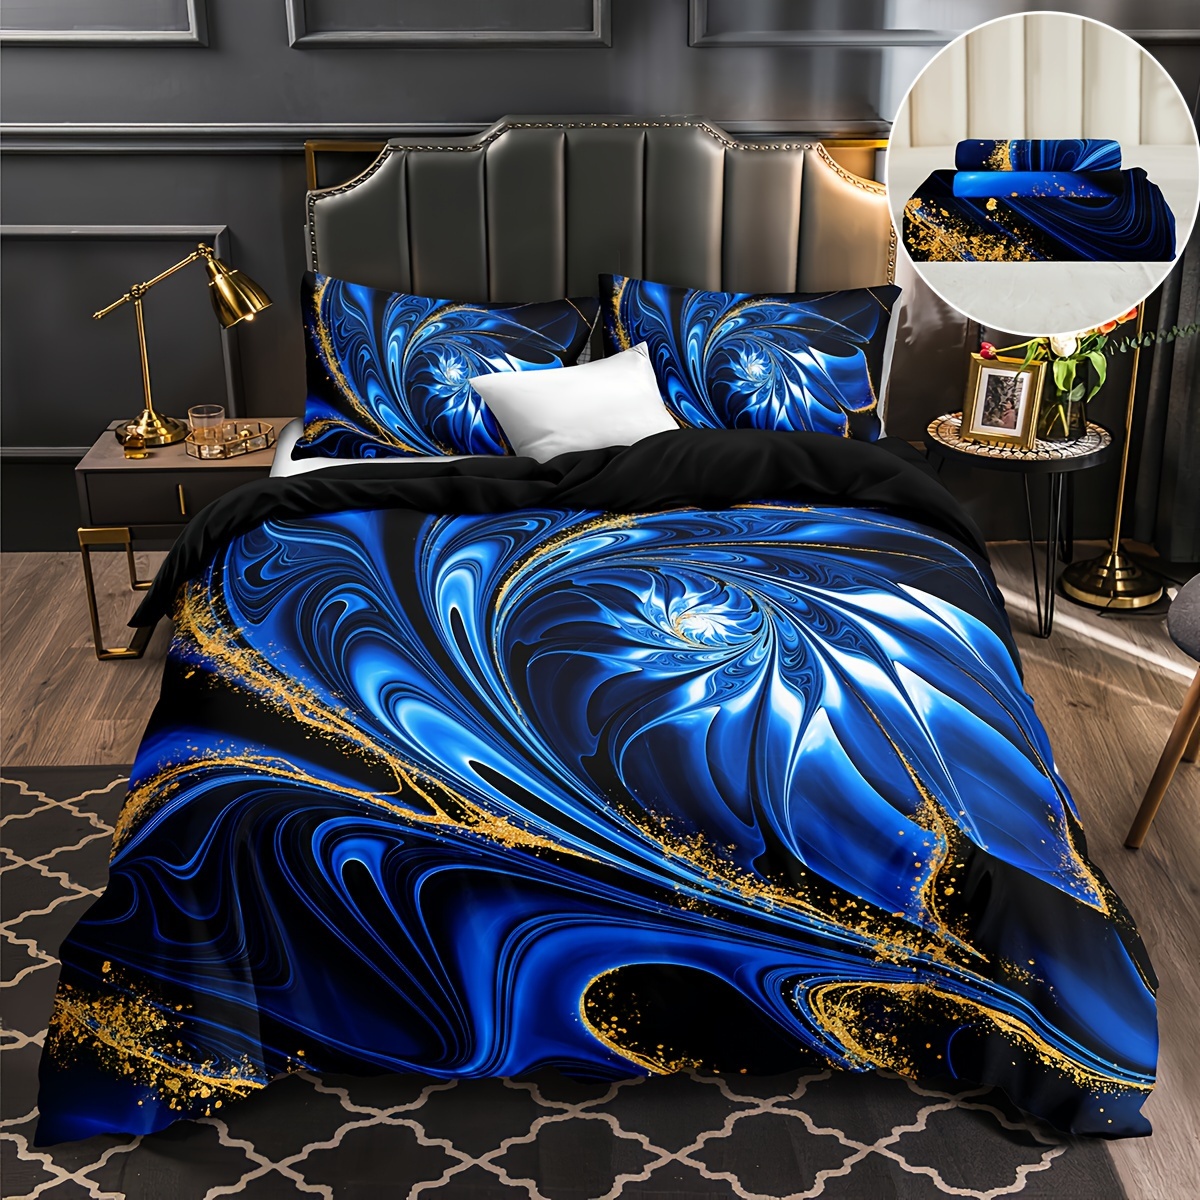 

3pcs Digital Print Polyester Duvet Cover Set With 2 Pillowcases - Flowing Gold On Blue And Black Pattern, All-season Bedding Set With Zipper Closure, Machine Washable, Multiple Sizes Available